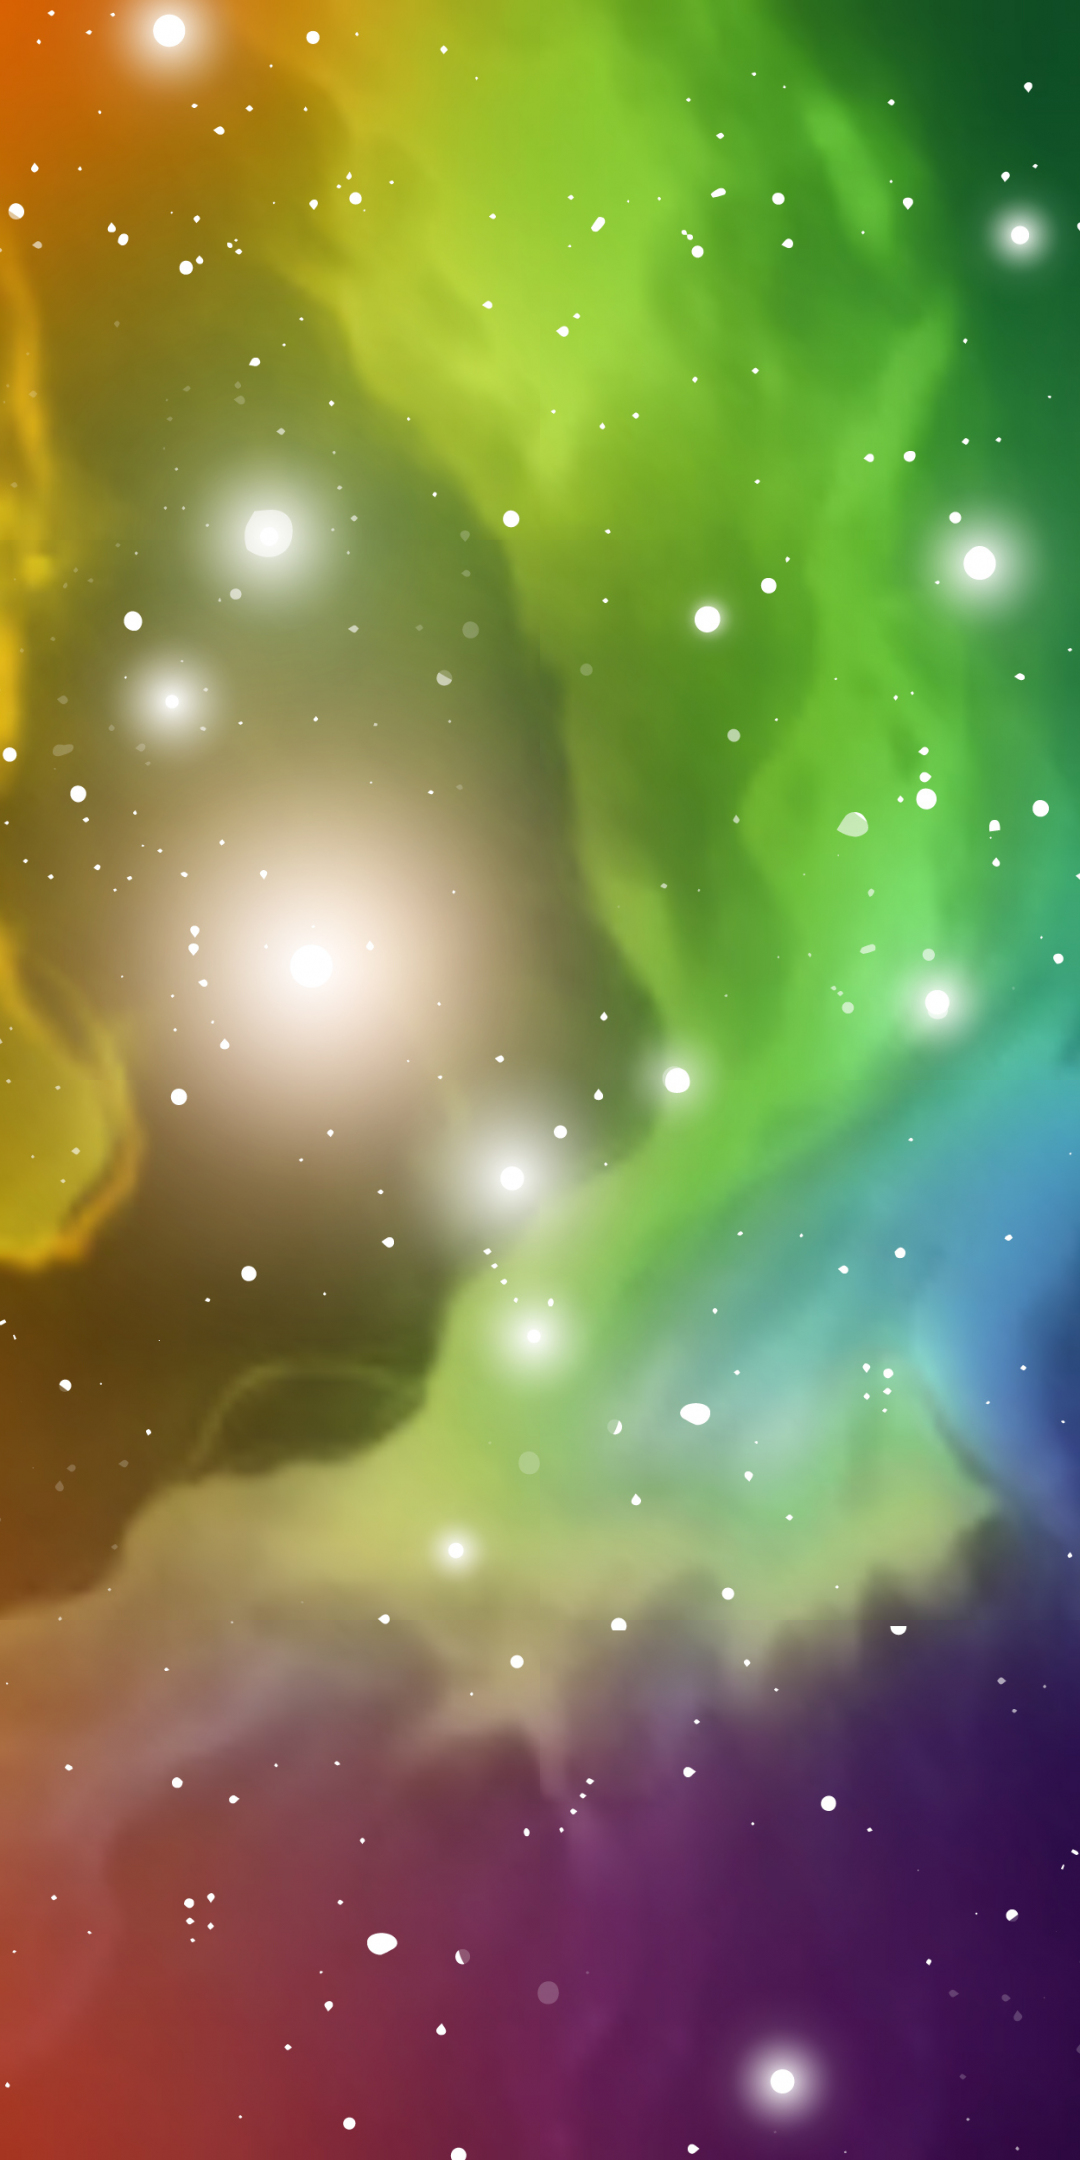 Abstraction art, cosmos, clouds, colorful, 1080x2160 wallpaper